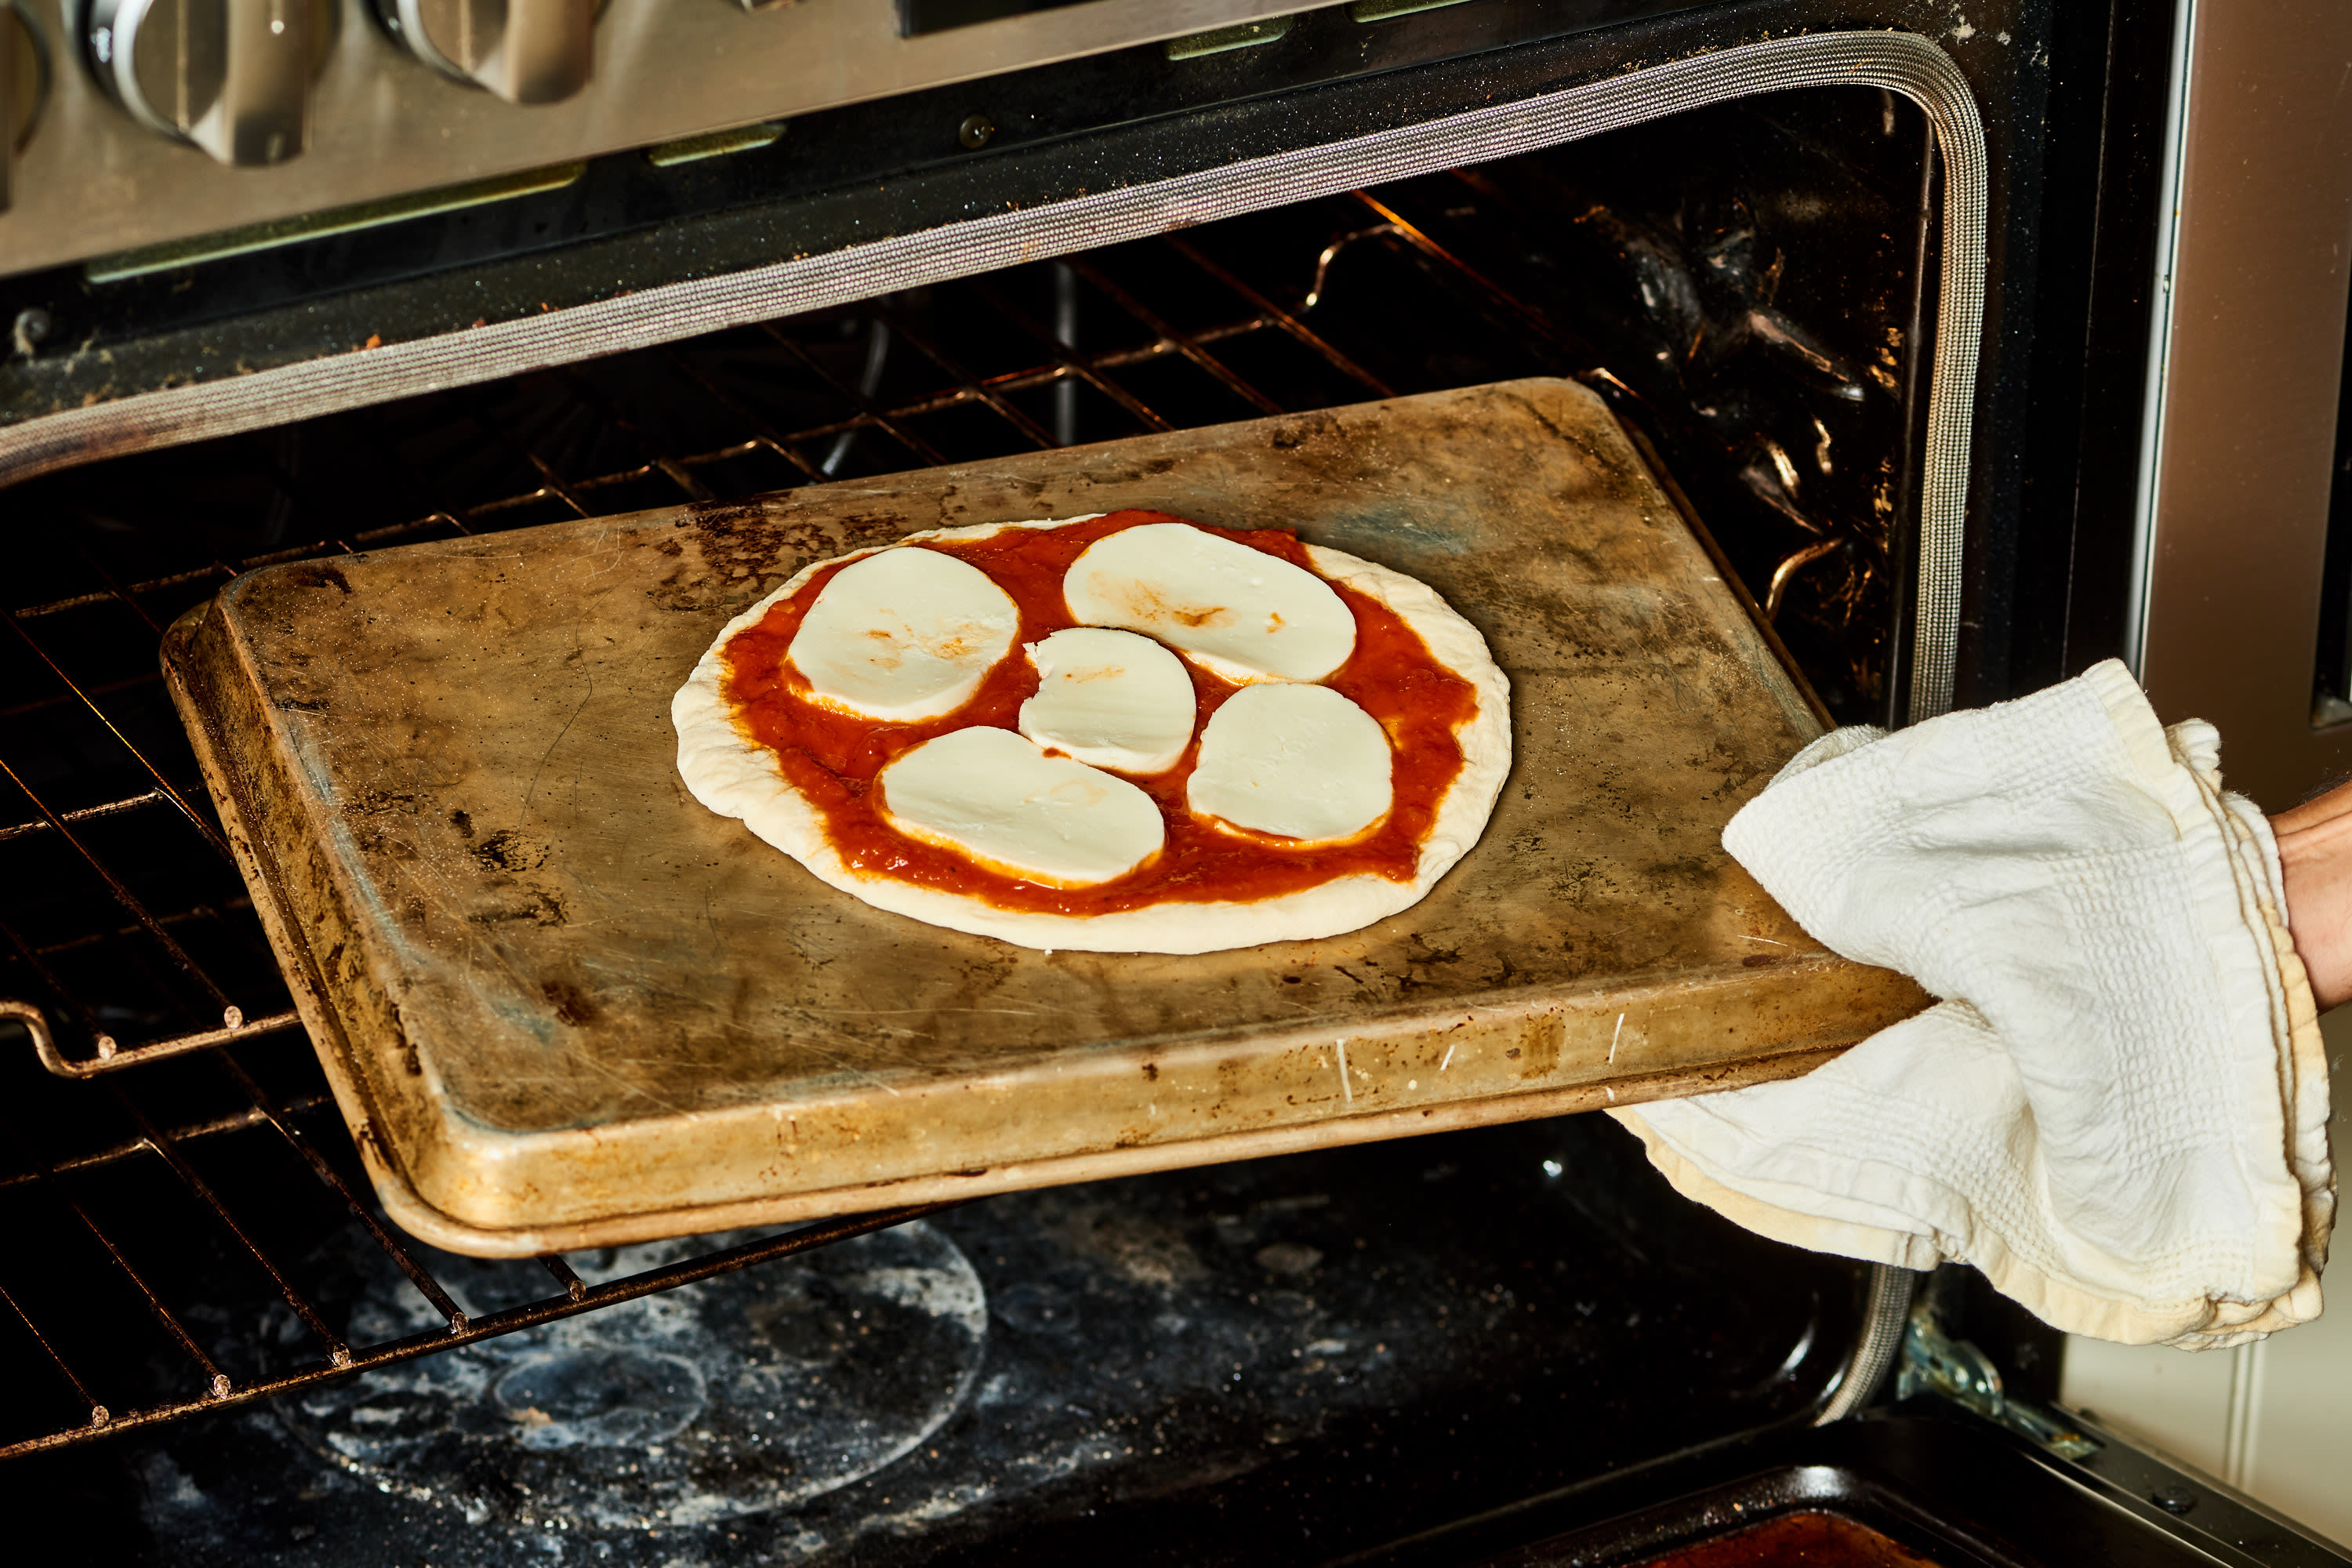 CAN YOUR PIZZA OVEN DO THIS?